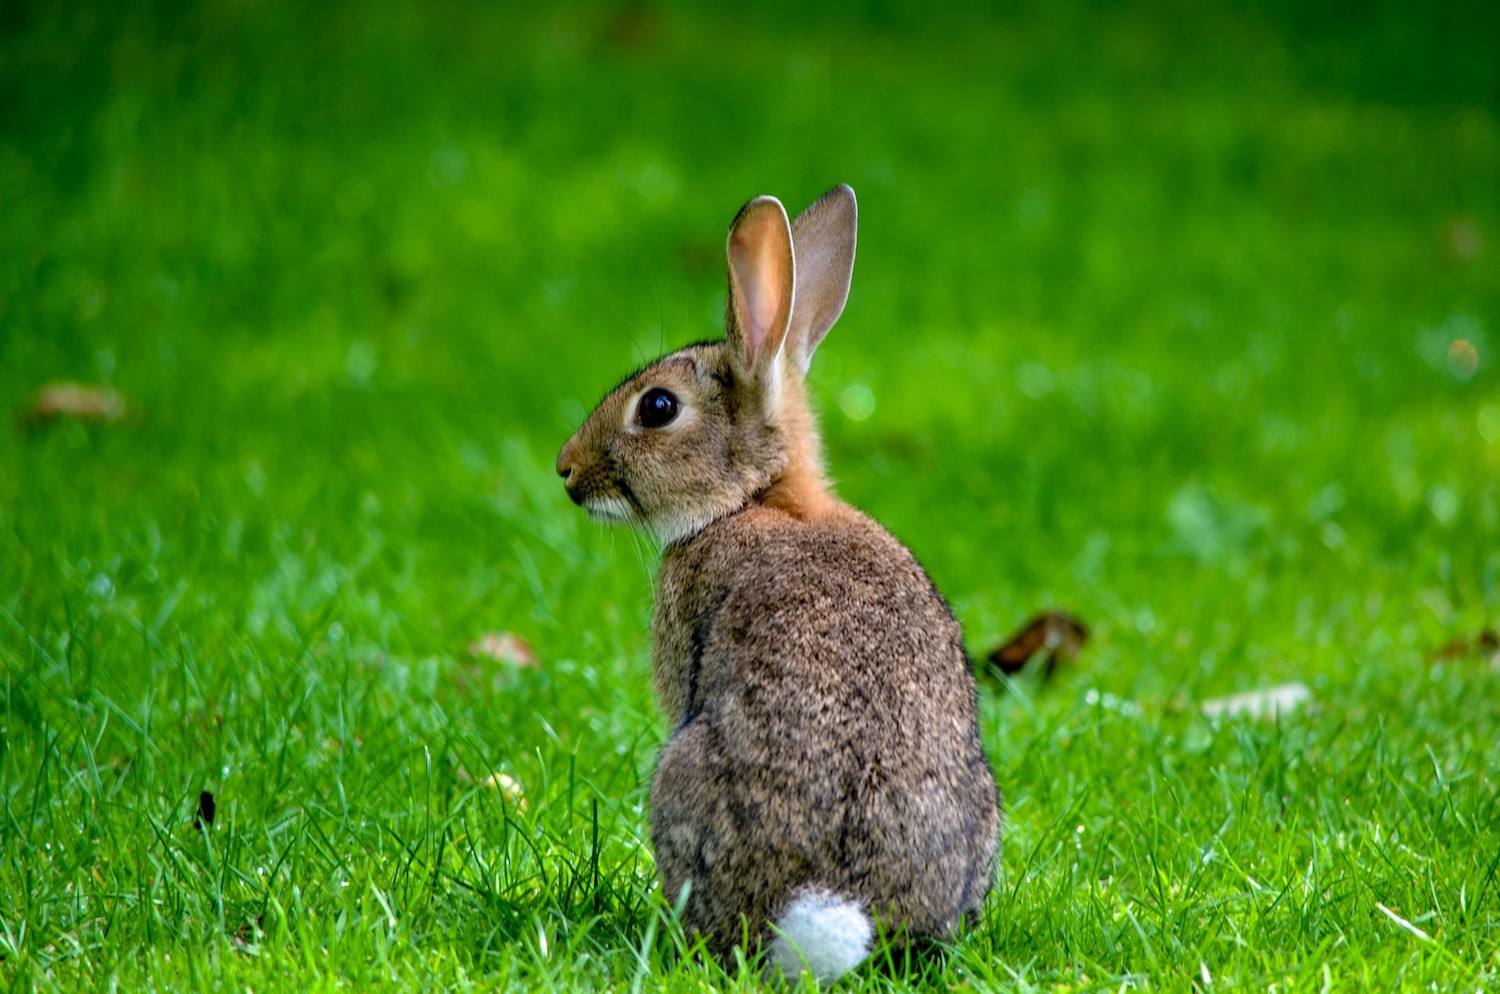 A rabbit sitting in the grass.